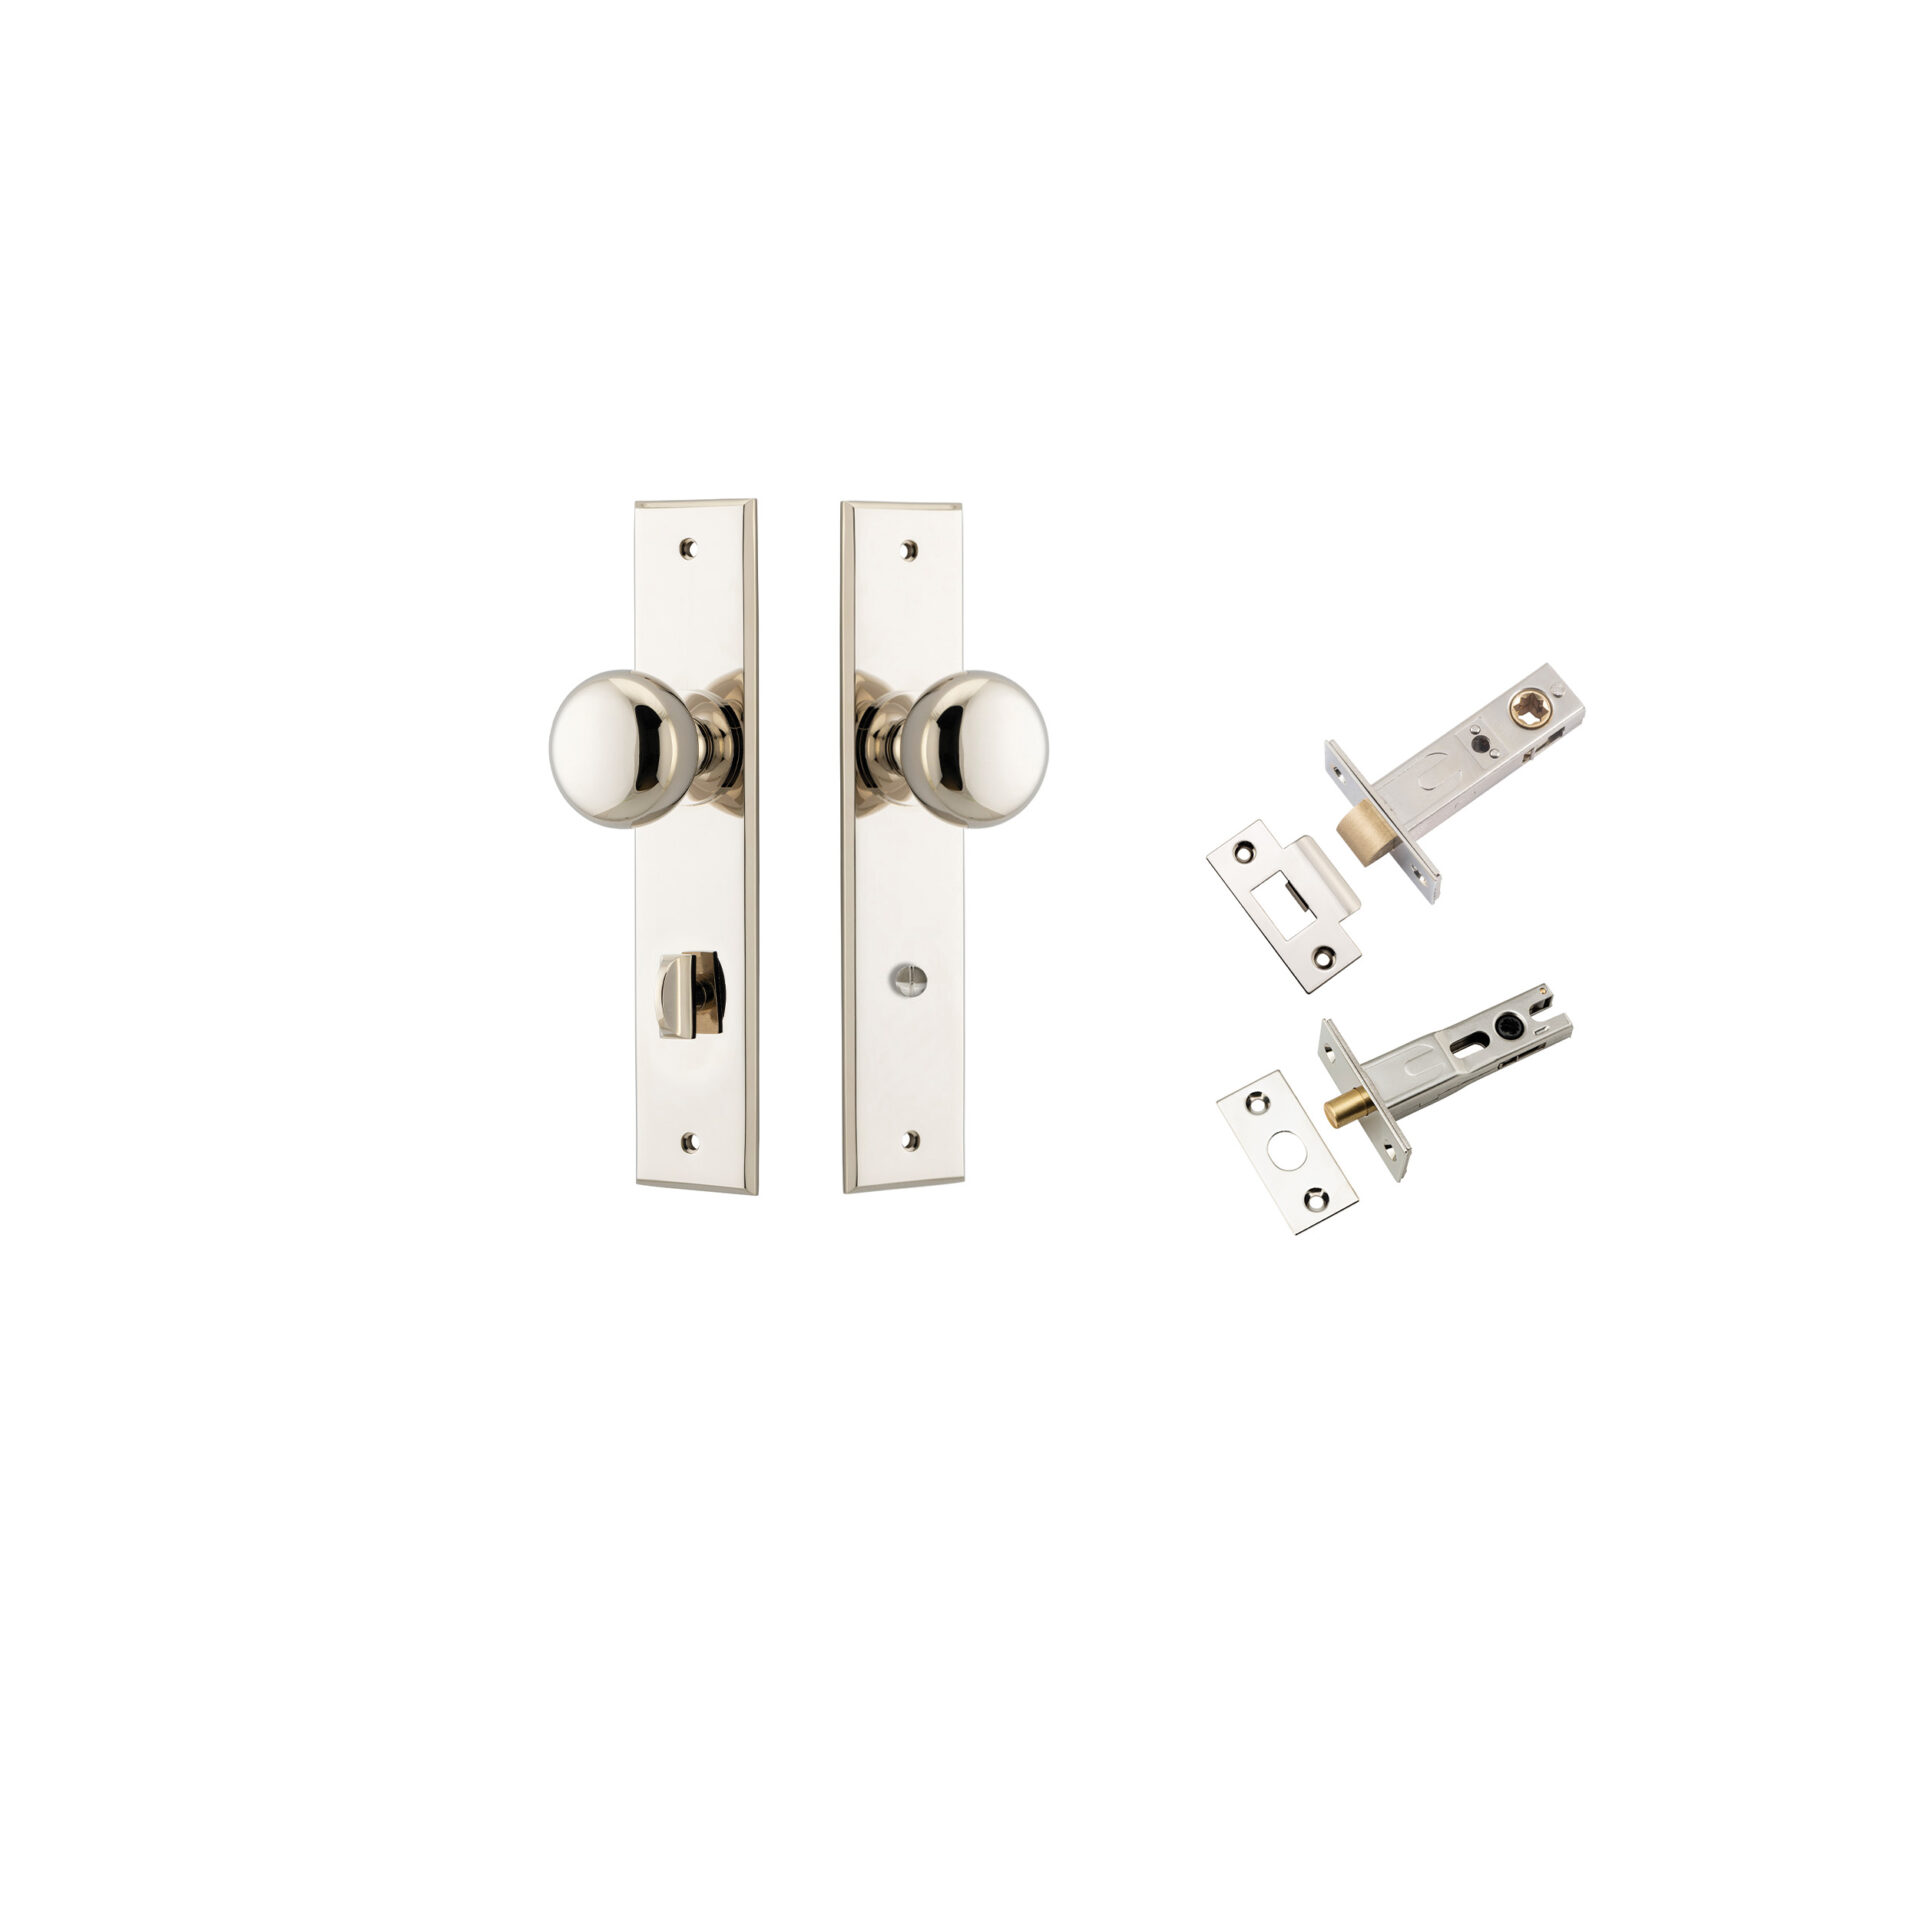 14446KPRIV60 - Cambridge Knob - Chamfered Backplate Privacy Kit with Privacy Turn - Polished Nickel - Privacy